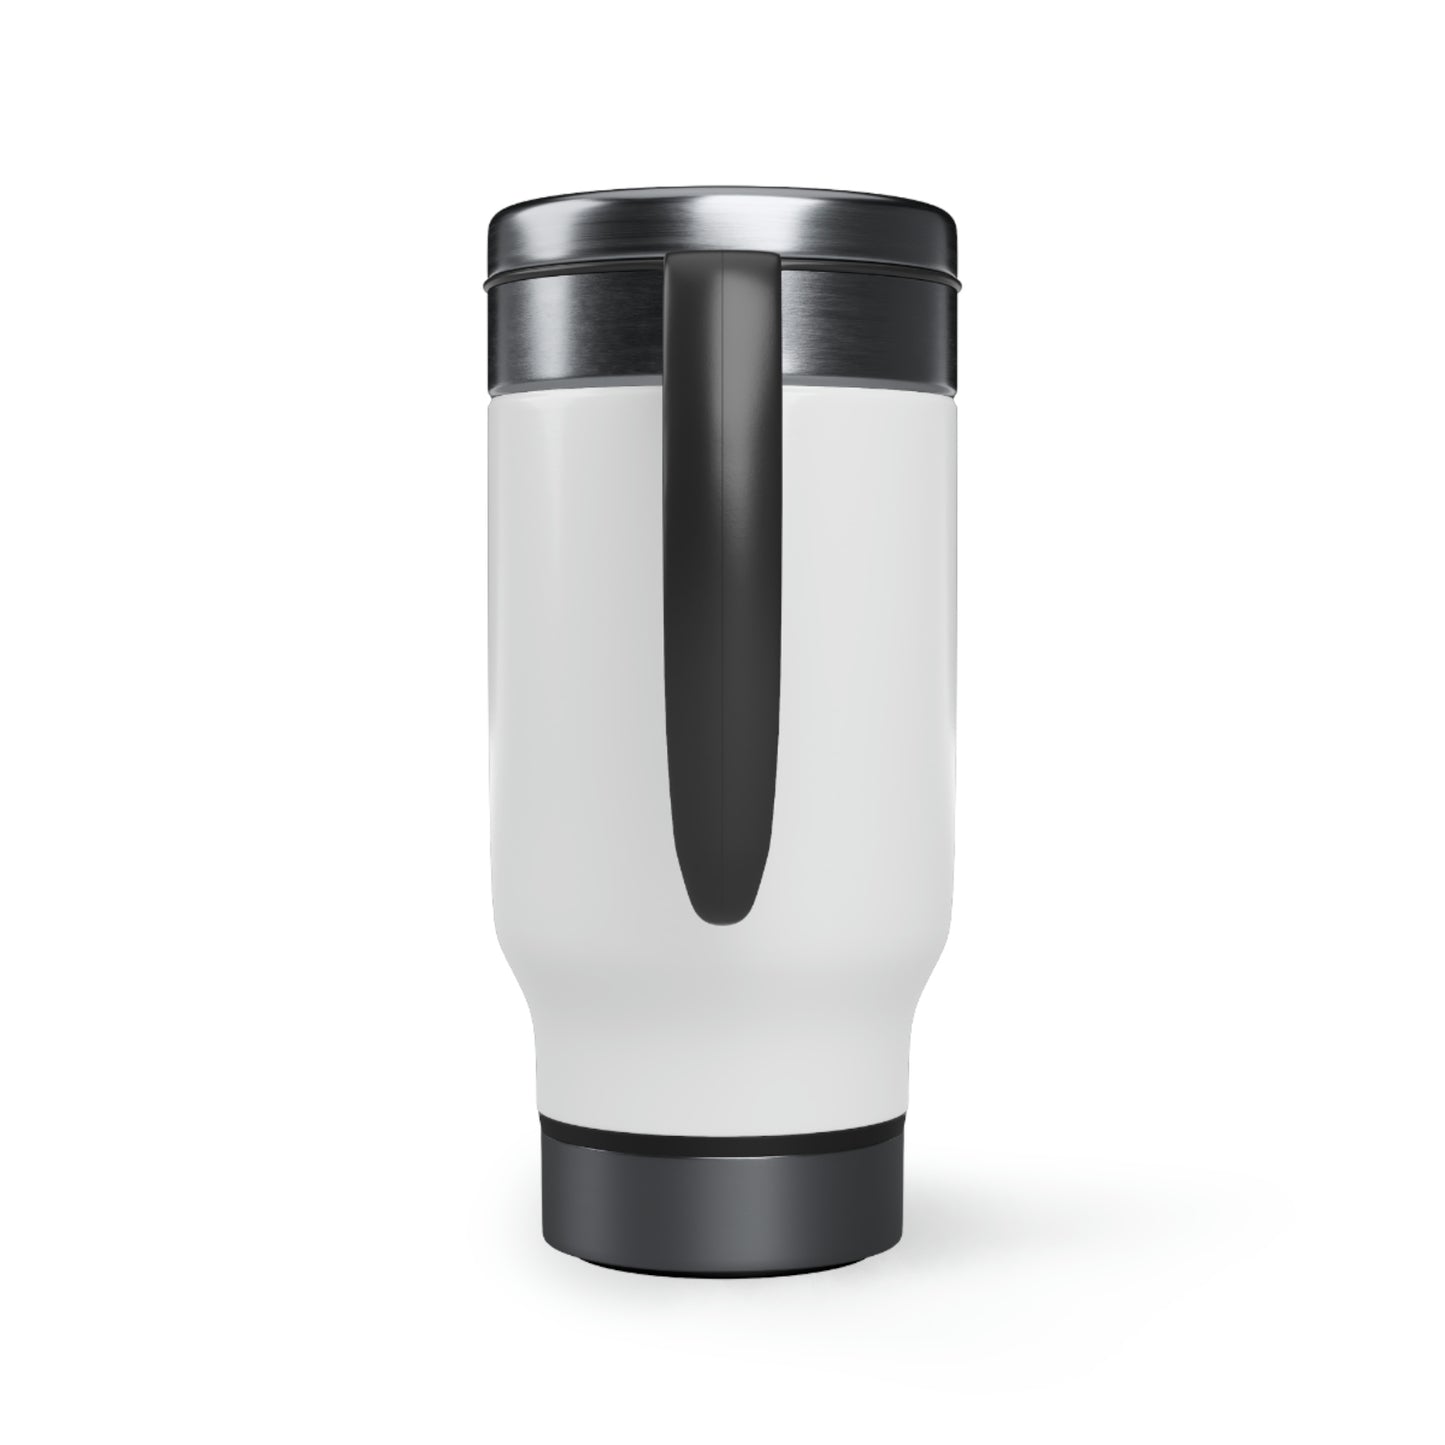 "I'd Rather Be  Reading" Stainless Steel Travel Mug with Handle, 14oz